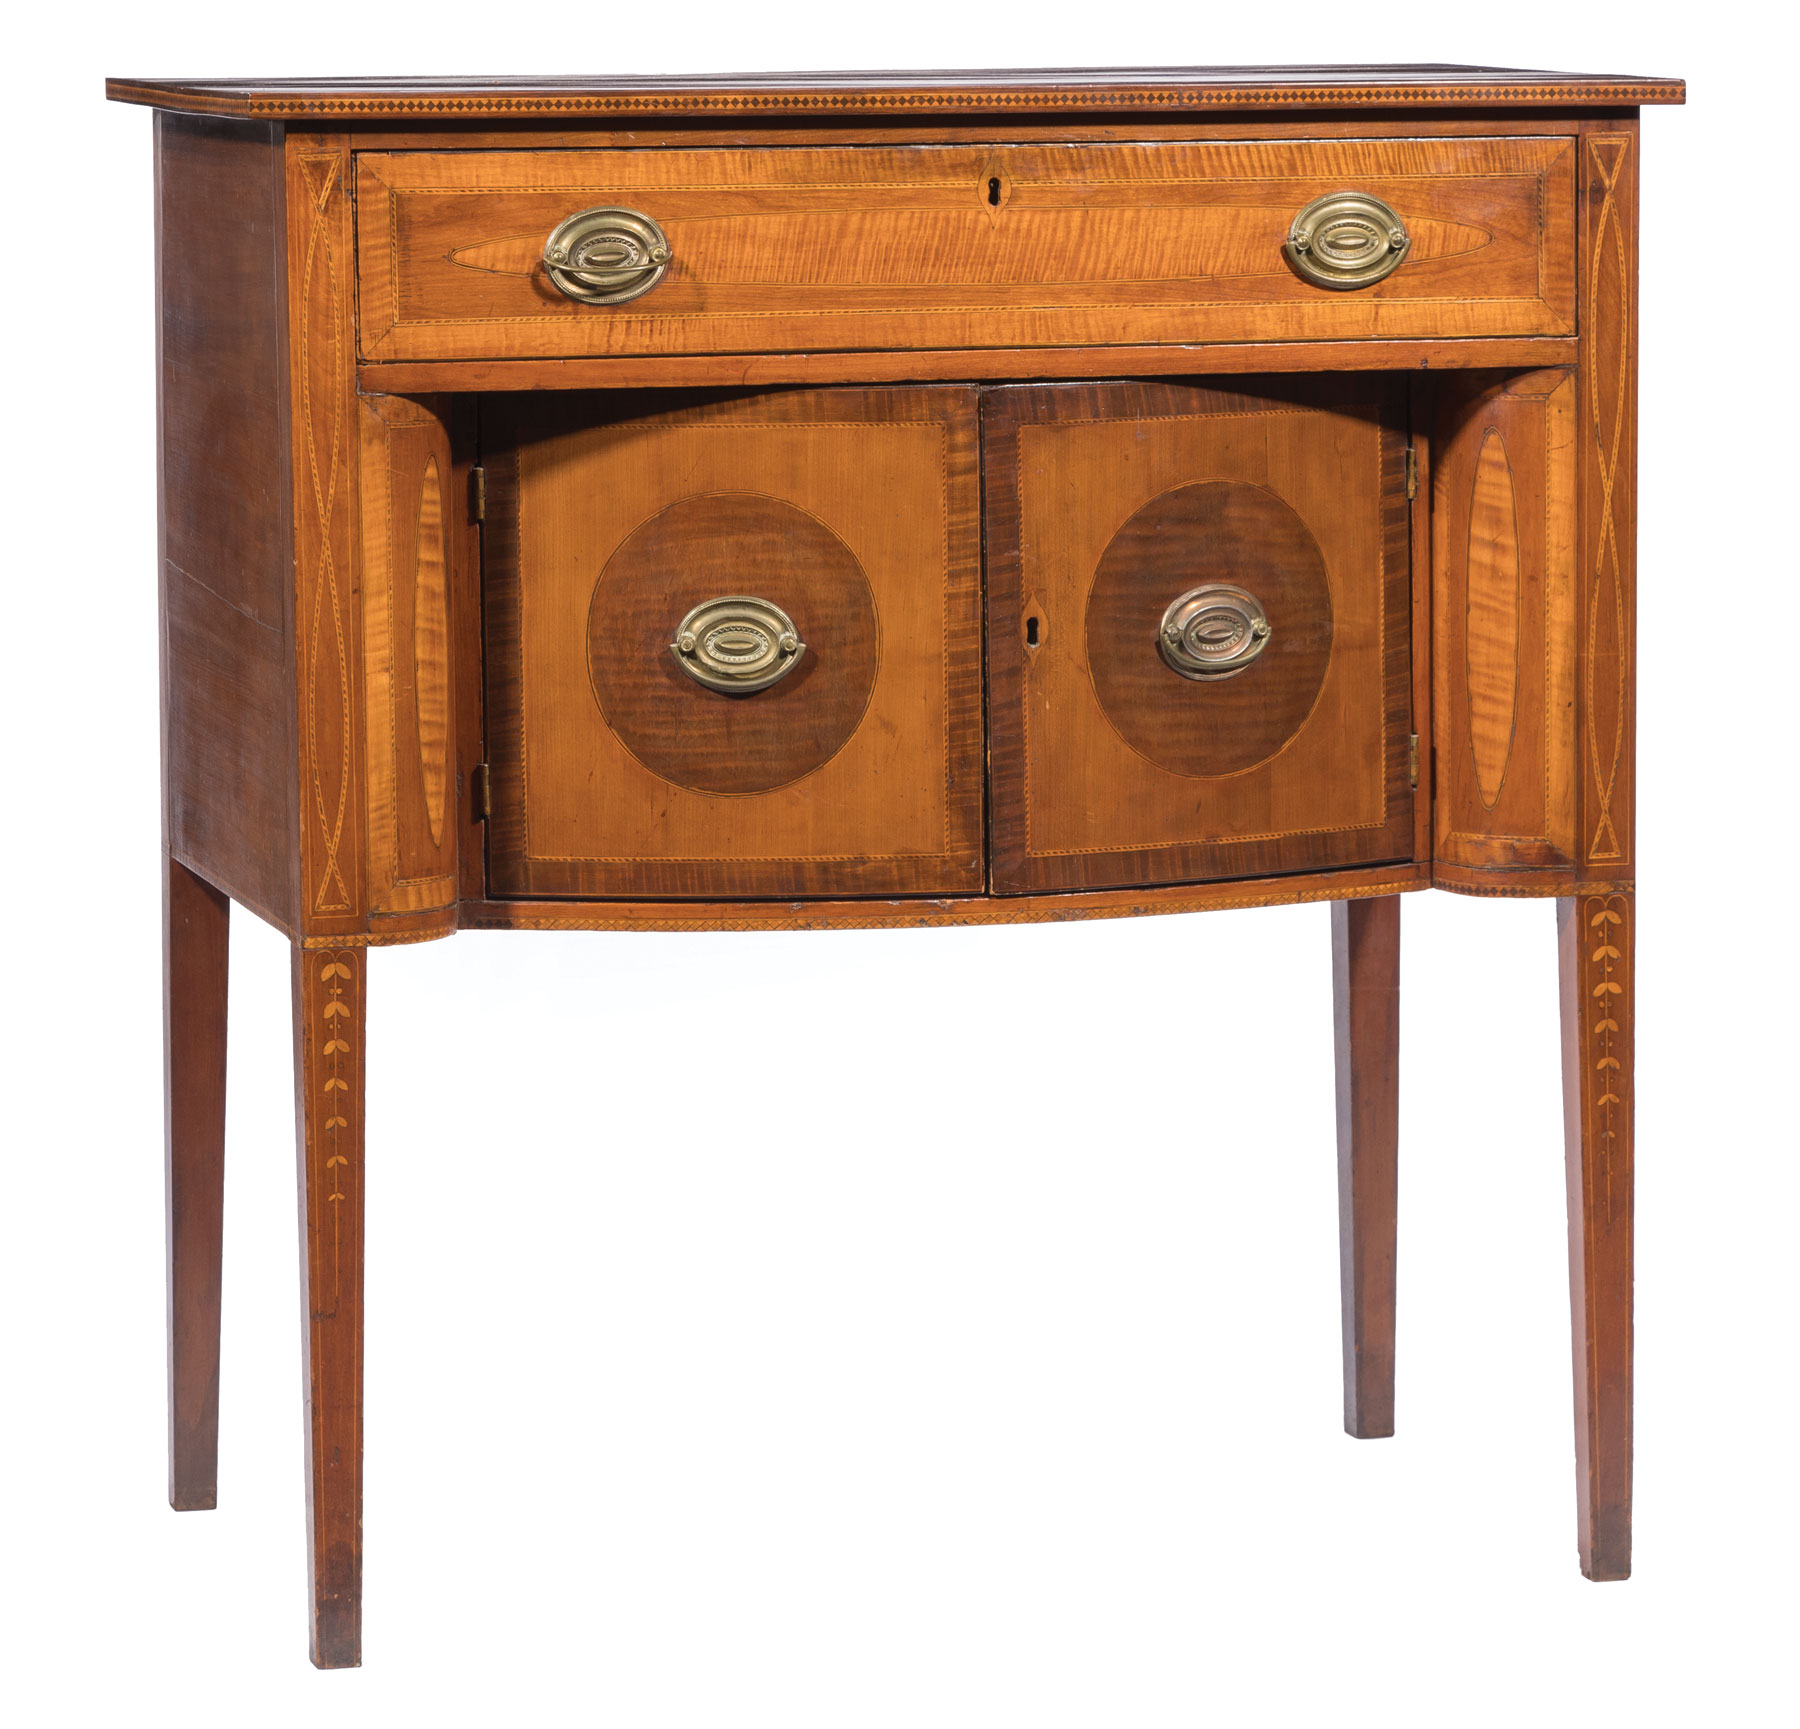 Federal Inlaid Mahogany, Cherrywood and Tiger Maple Server , late 18th/early 19th c., probably New